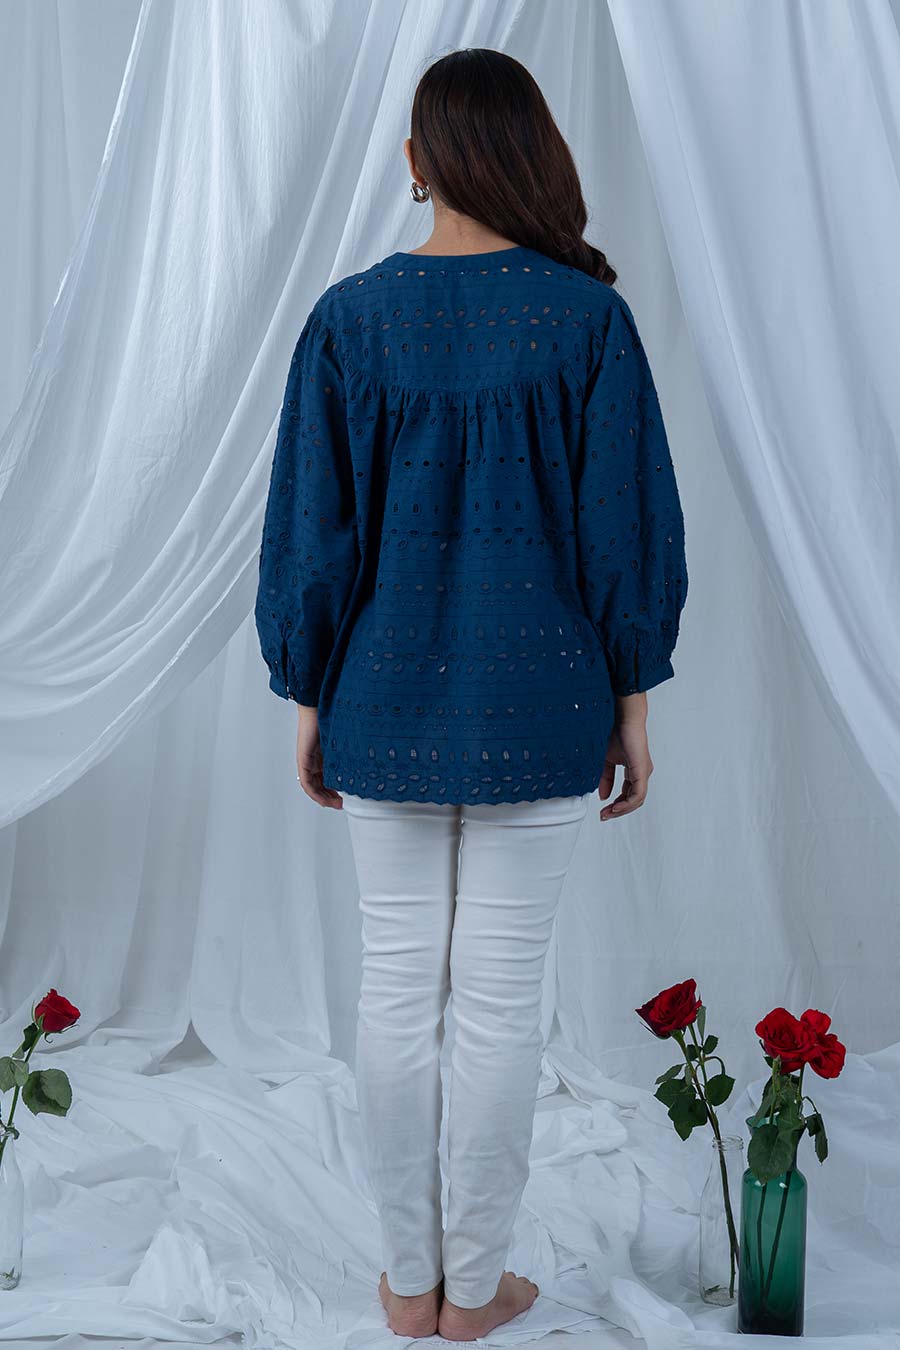 Navy Blue Cotton Embroidered Top